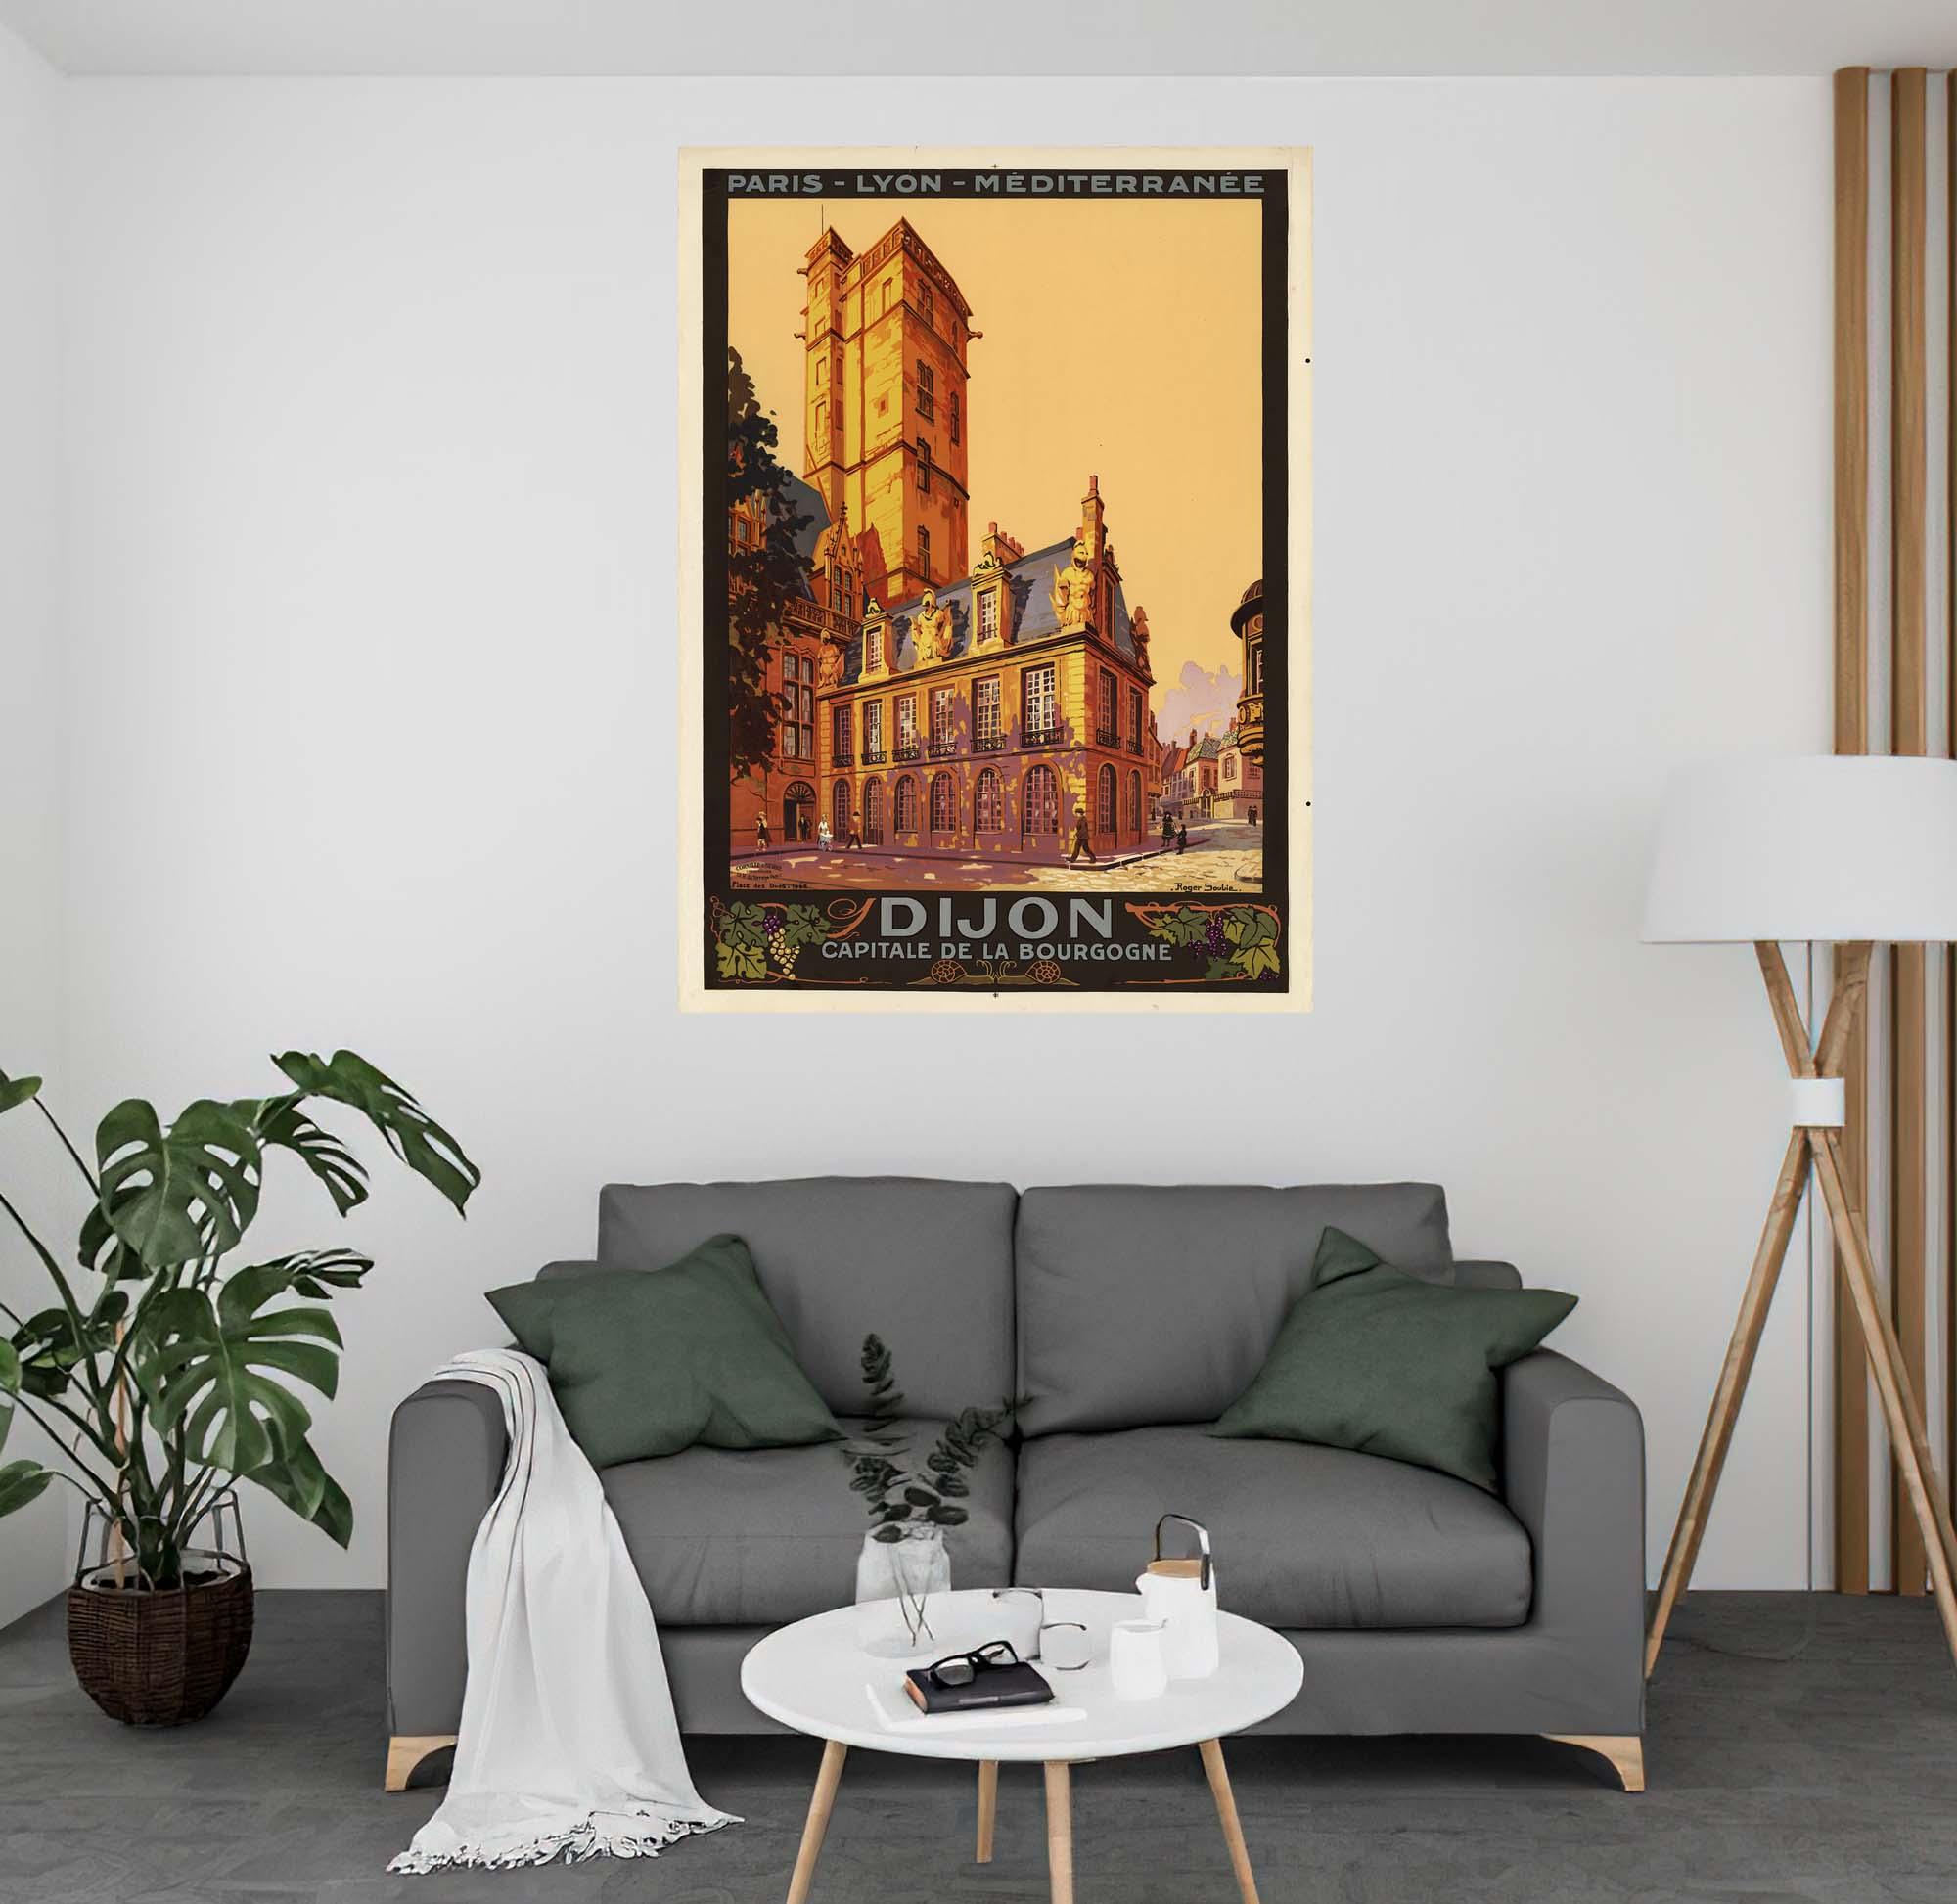 CoolWalls.ca diecut Vintage French Railways Dijon Tourism Poster, Wall Decal Sticker Wallpaper, PEEL-N-STICK, removable anytime. Great for a classroom